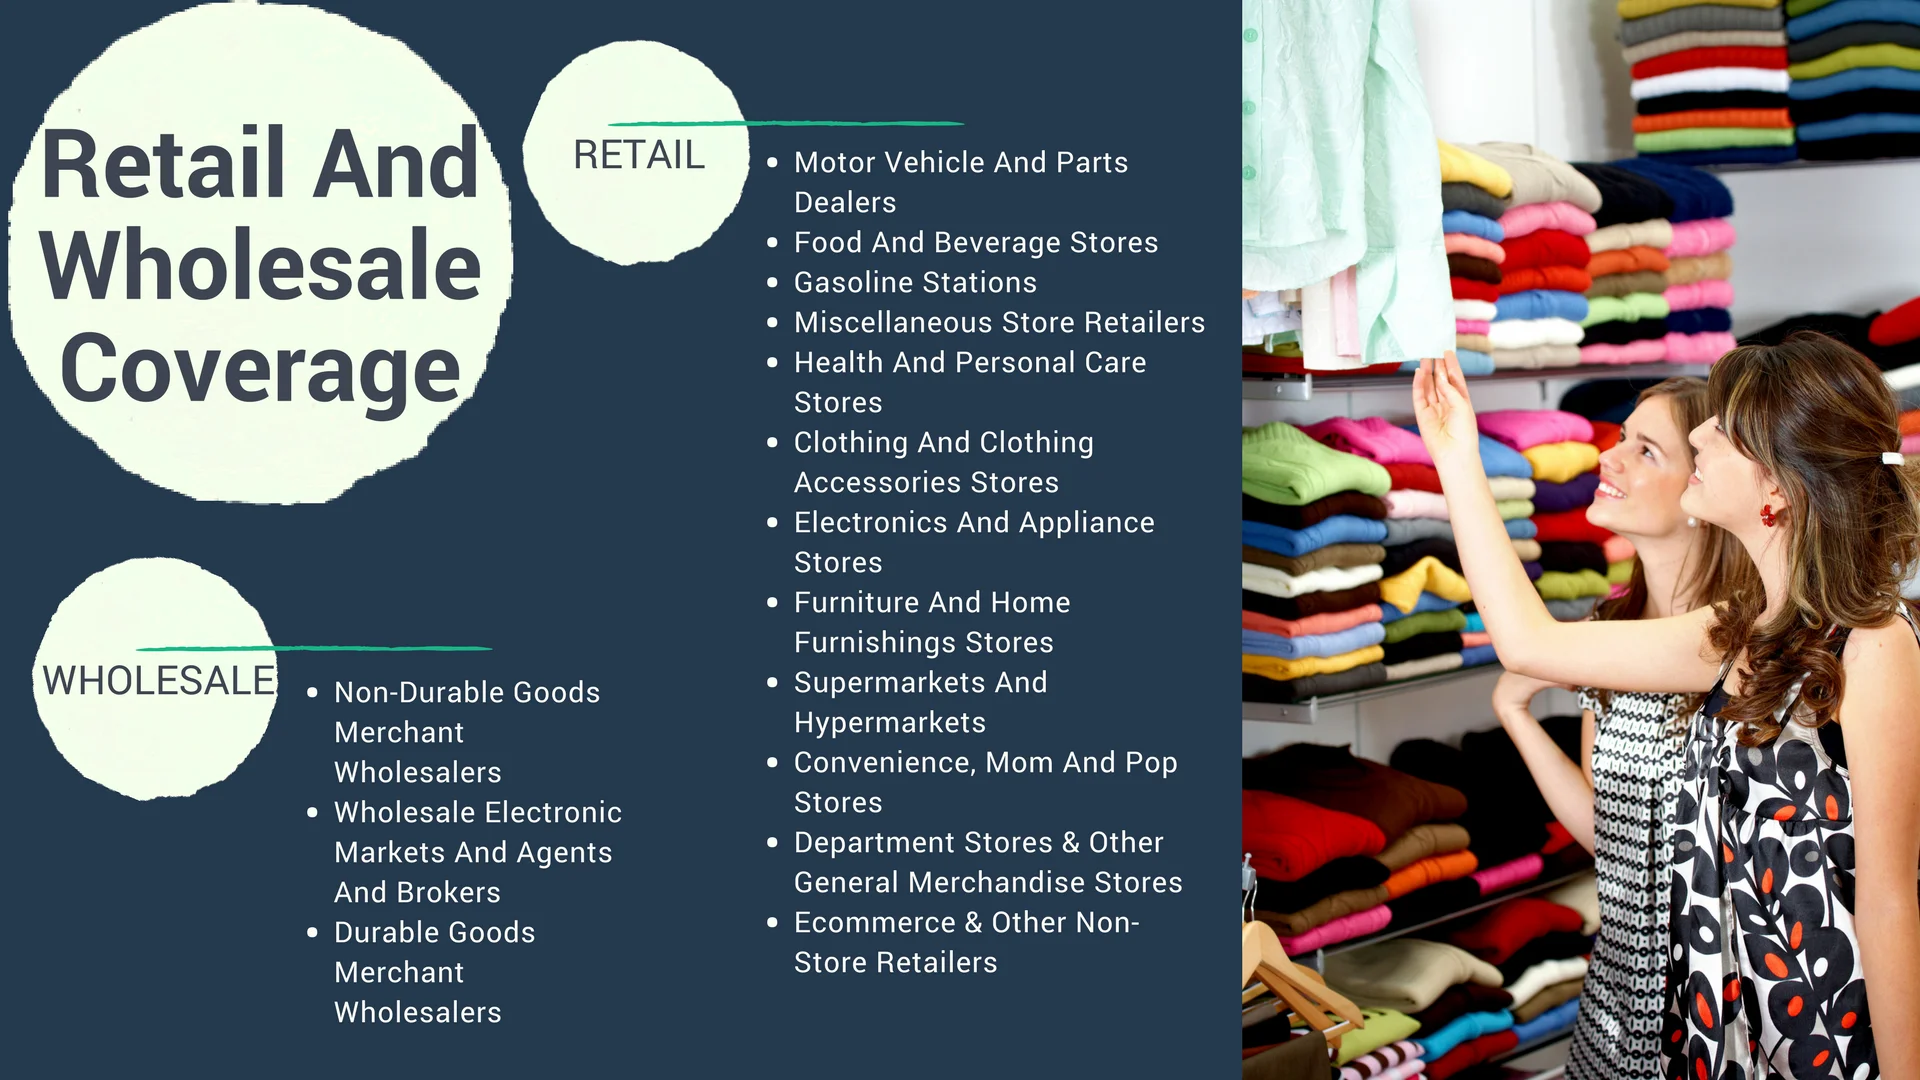 Retail and Wholesale Coverage